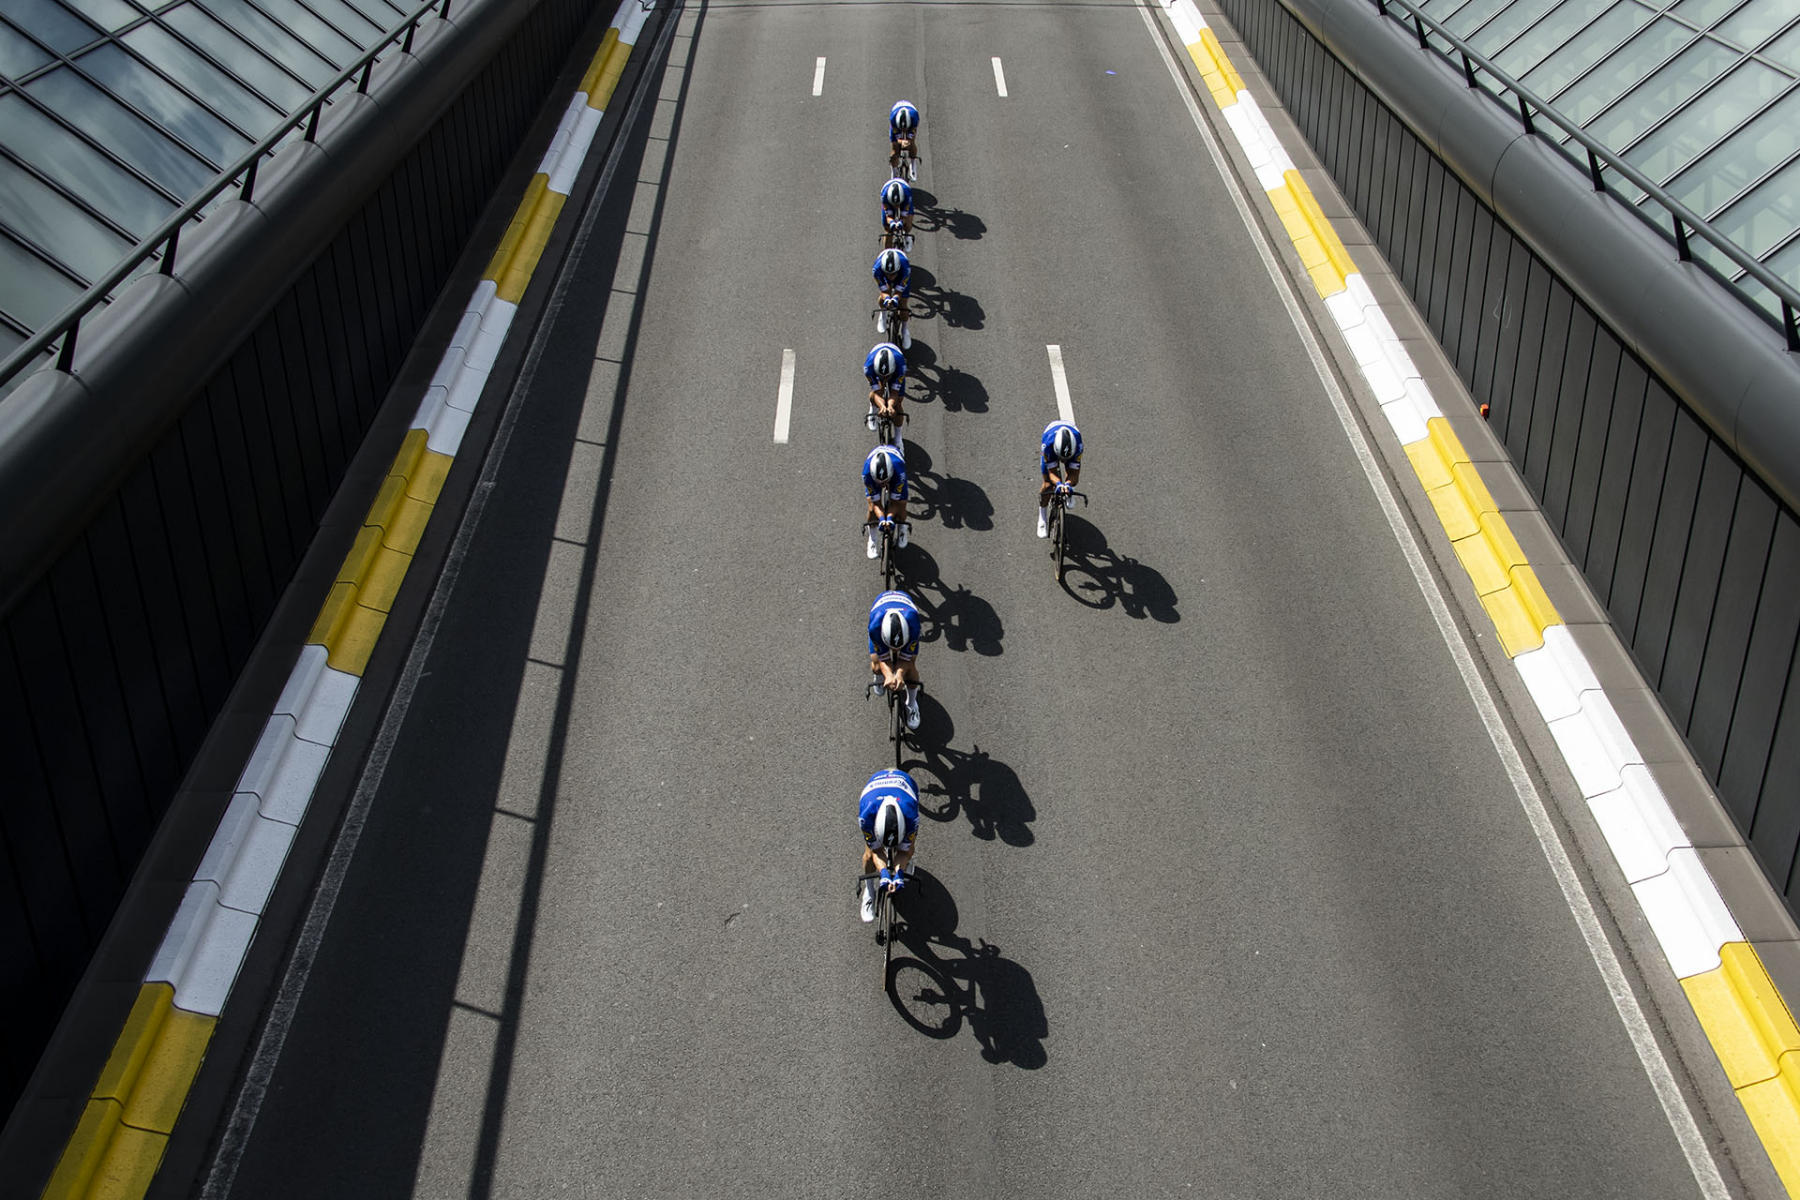 Tour de France 2019 - Stage Two - Deceuninck Quick-Step ride during the Team Time Trial